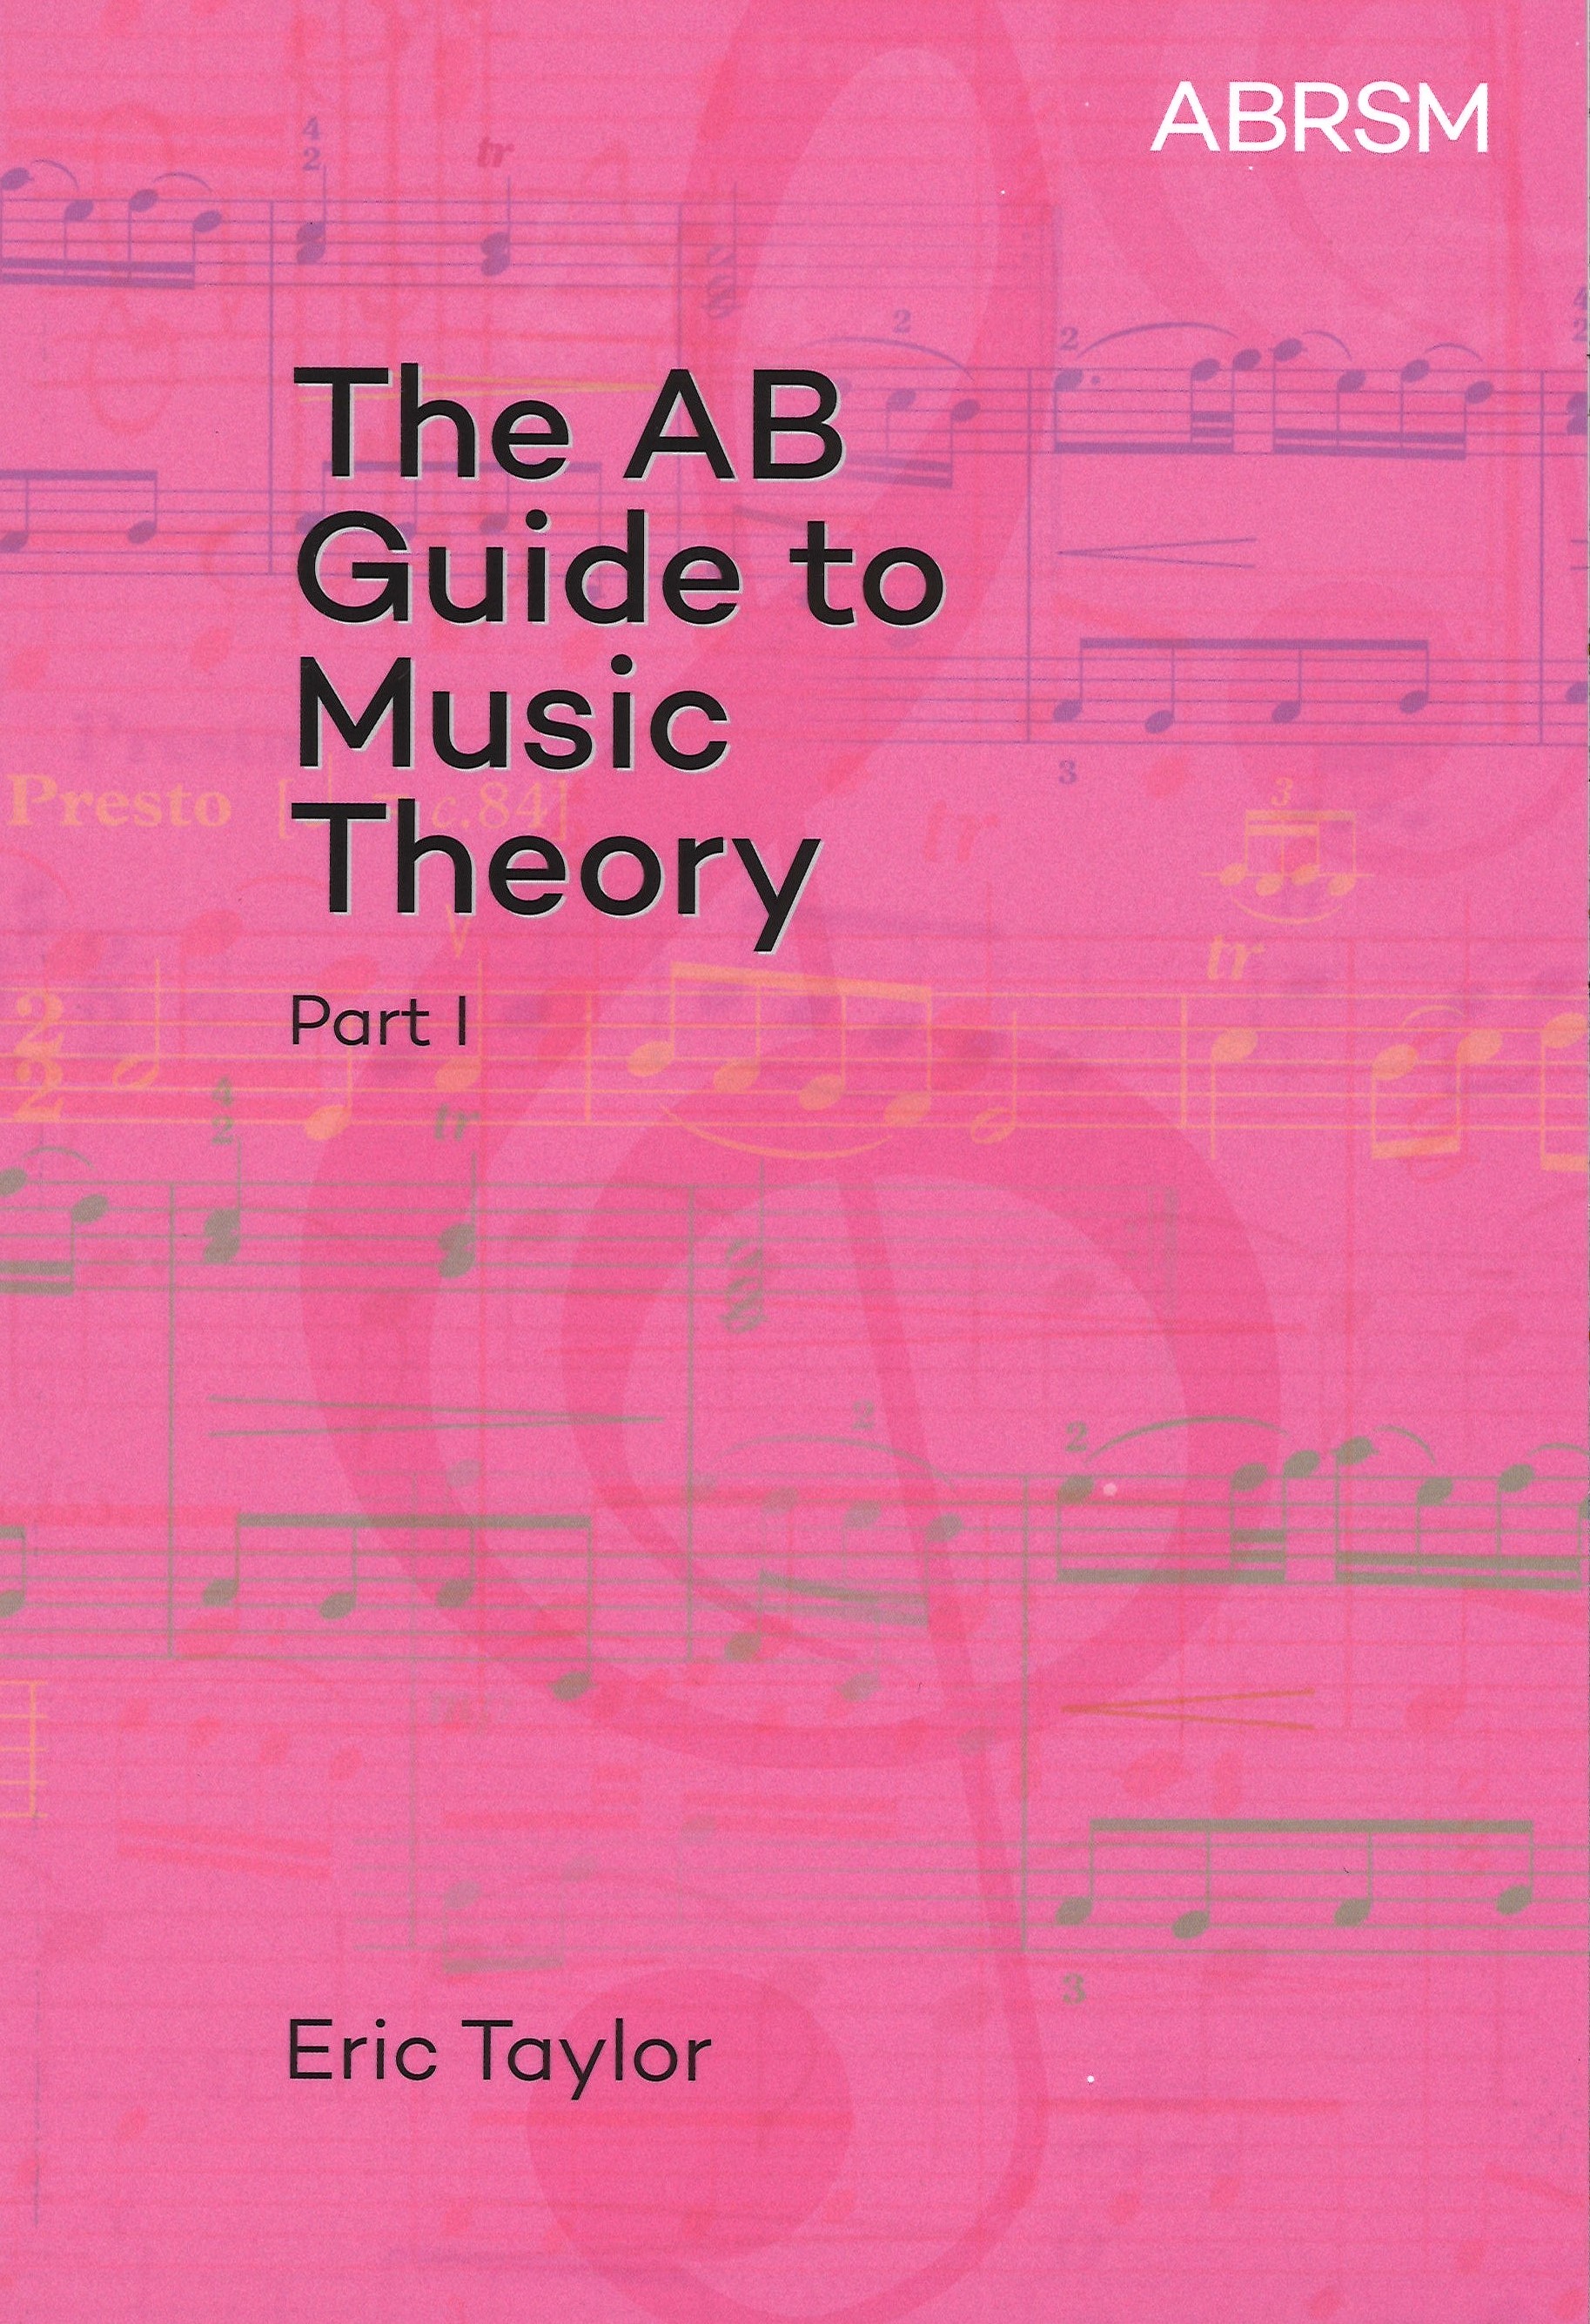 Ab Guide To Music Theory Part 1 (gr 1-5) Abrsm Sheet Music Songbook